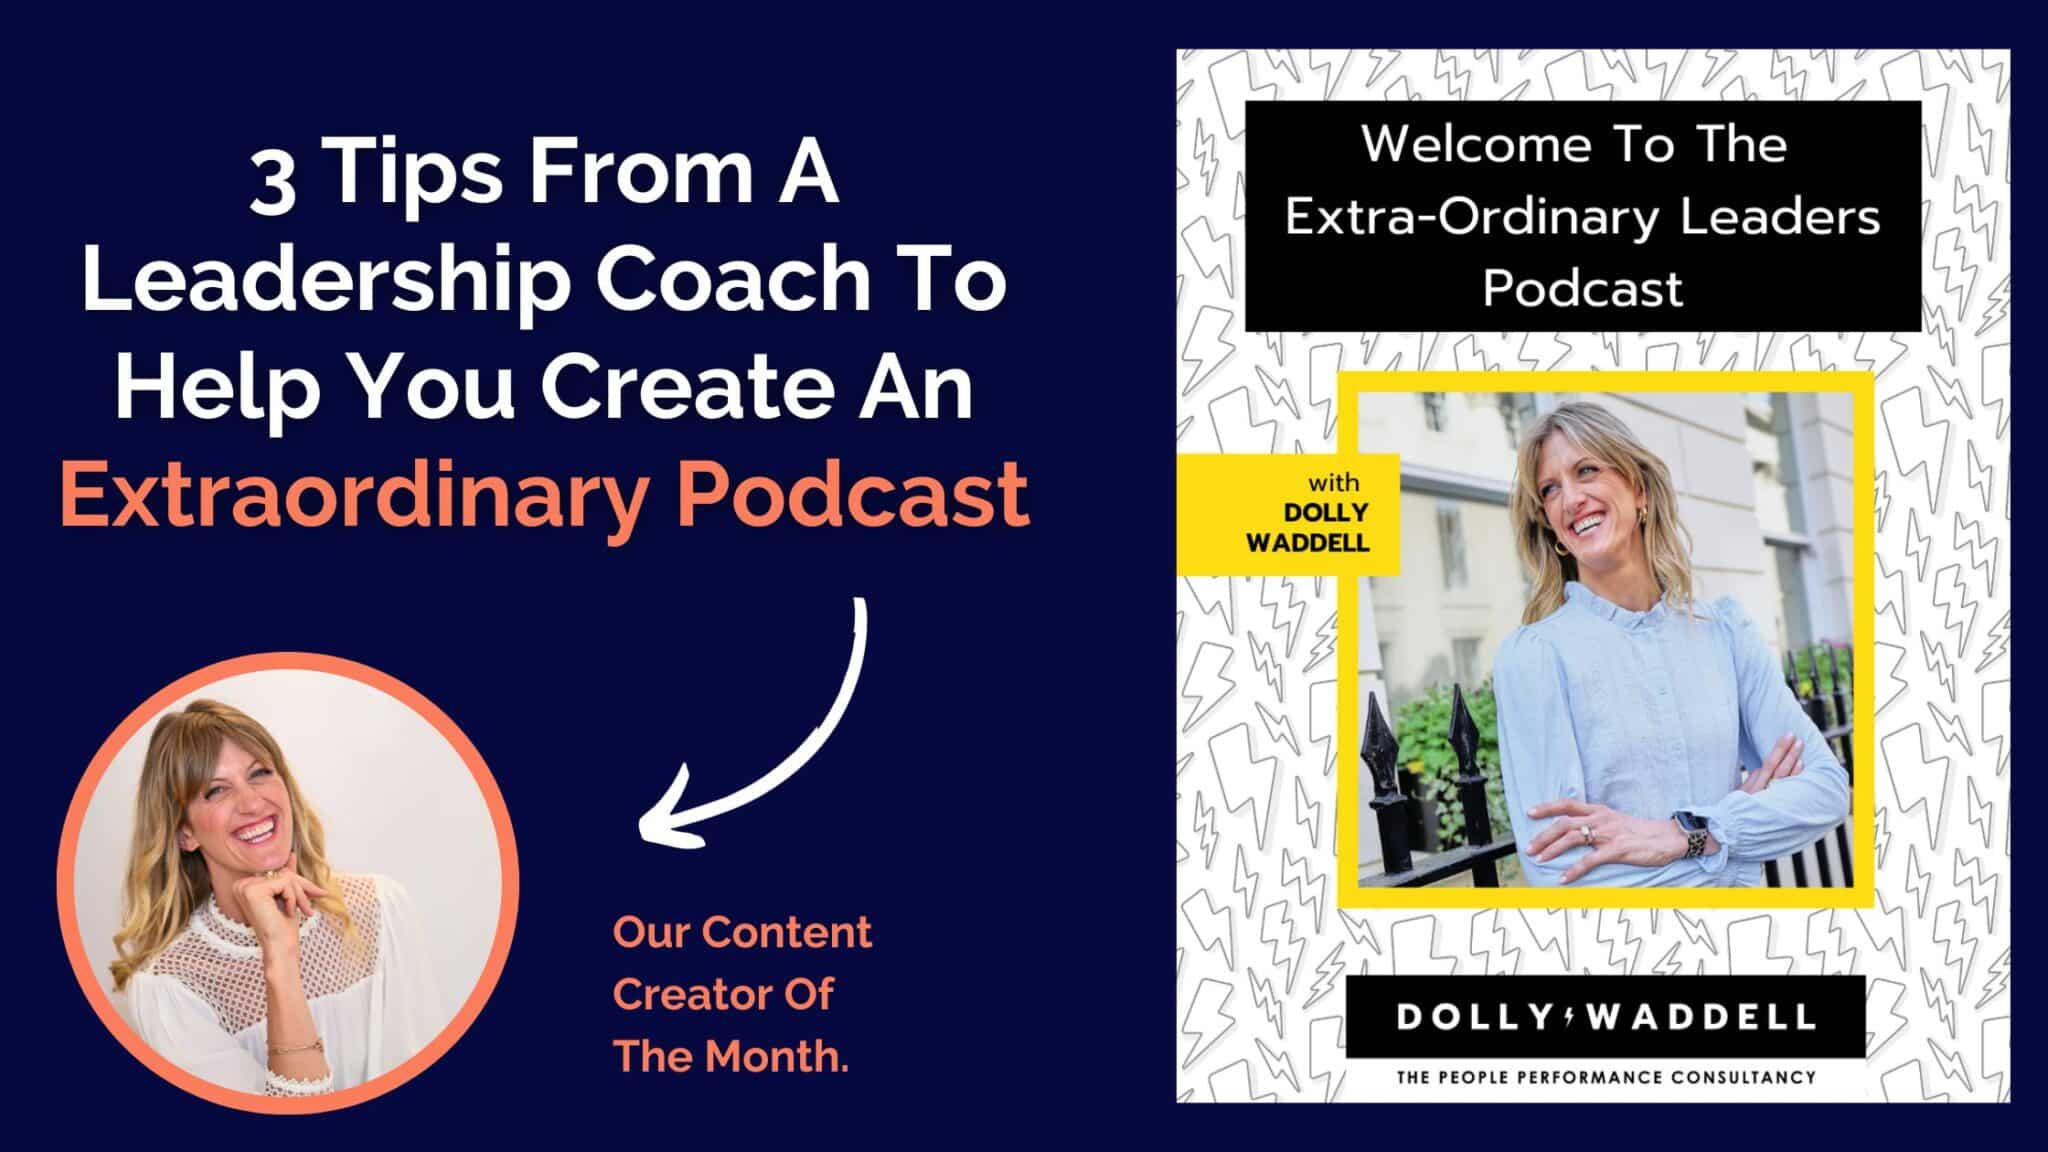 3 Tips From A Leadership Coach To Help You Create An Extraordinary Podcast